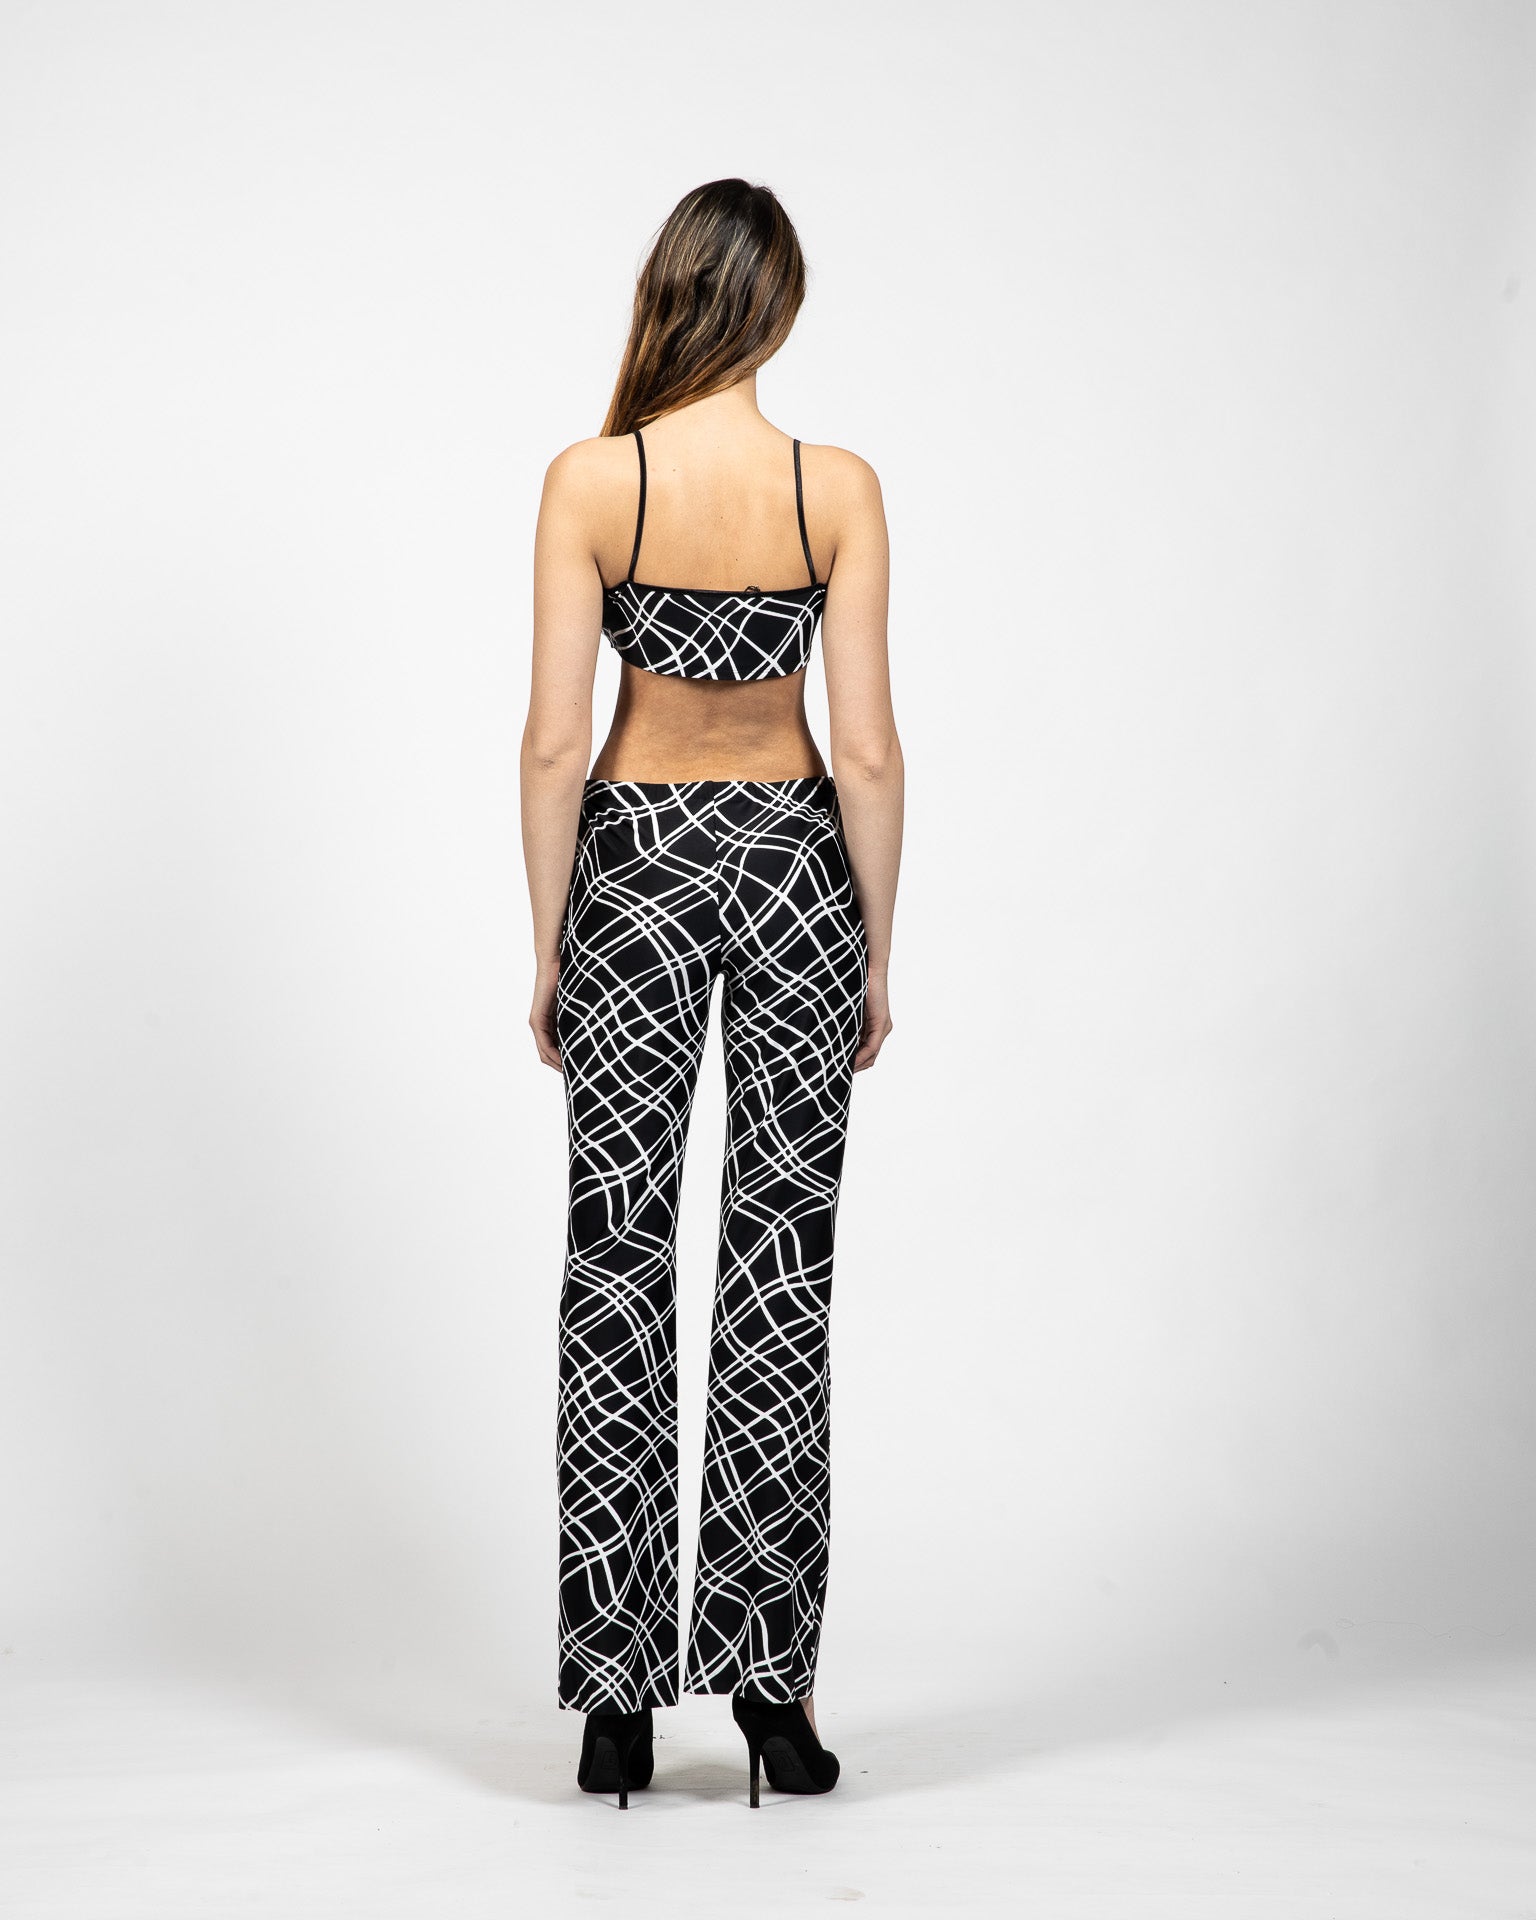 Printed Cropped Bra Top, Shorts And Pants With Waist Bands - Back View - Samuel Vartan